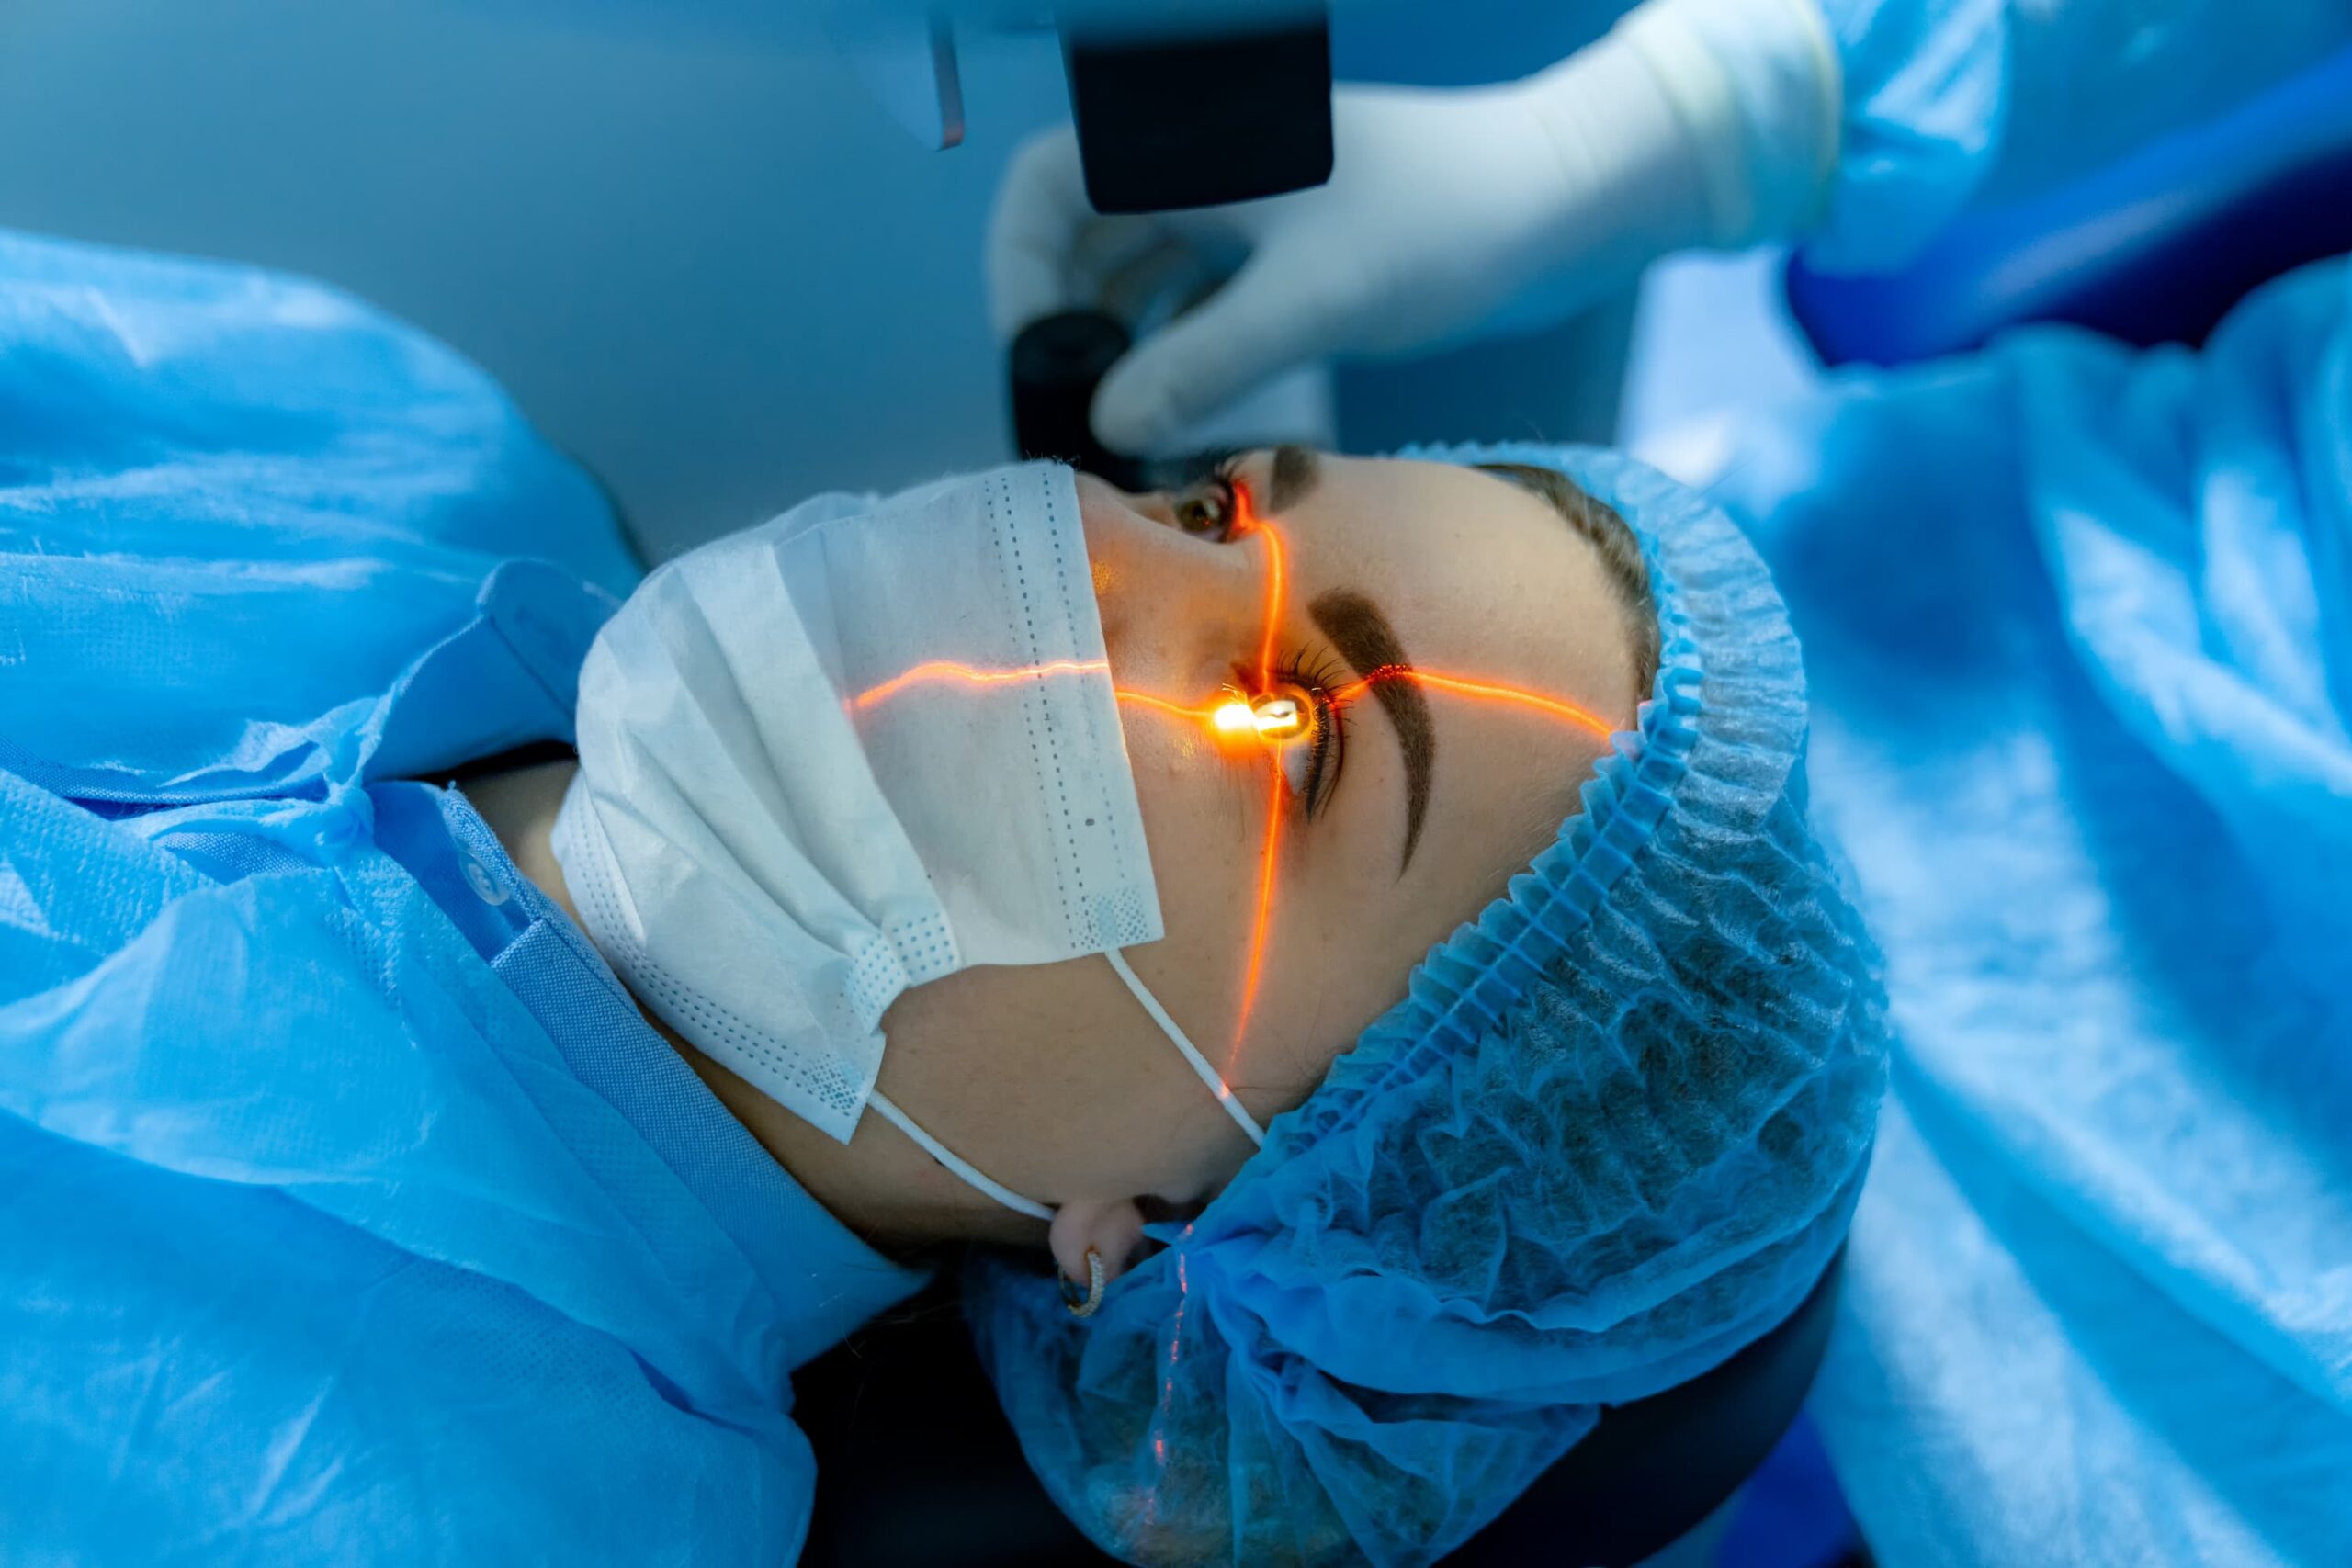 Implantable lenses for cataracts in Reno, Nevada.